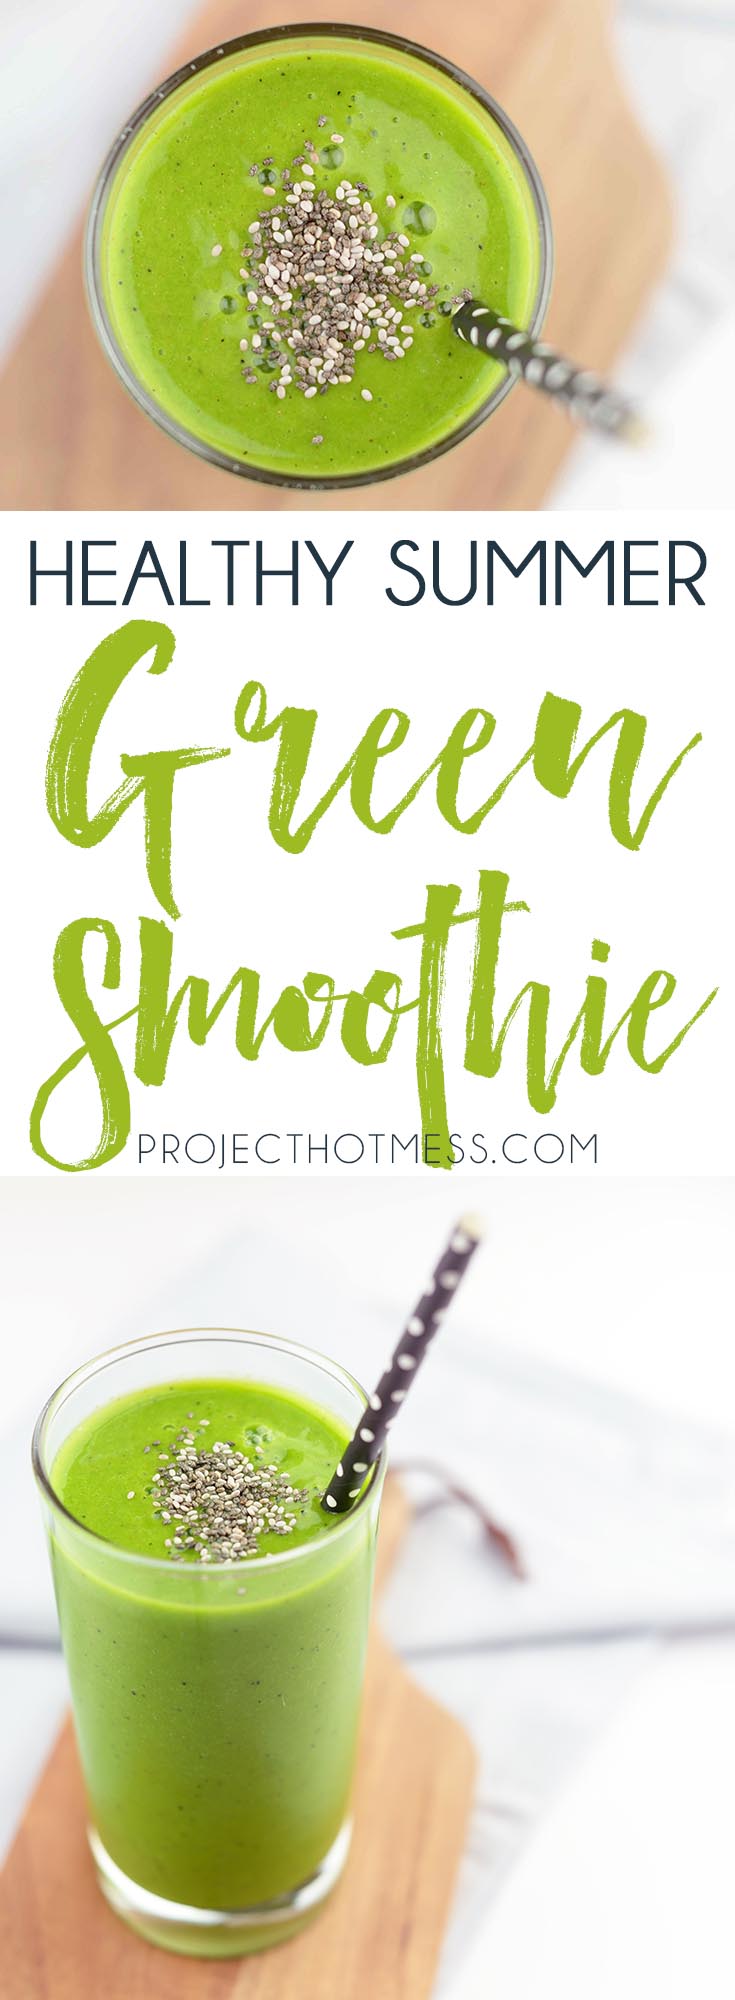 Green smoothies are great any time of year, but this summer green smoothie recipe just screams tropical goodness! Plus it's a super healthy smoothie too! Green Smoothie | Healthy Smoothie | Fruit Smoothie | Healthy | Women's Health | Green Smoothie Inspiration | Smoothie Recipe | Breakfast Smoothie | Summer Smoothie | Green Smoothie Recipe